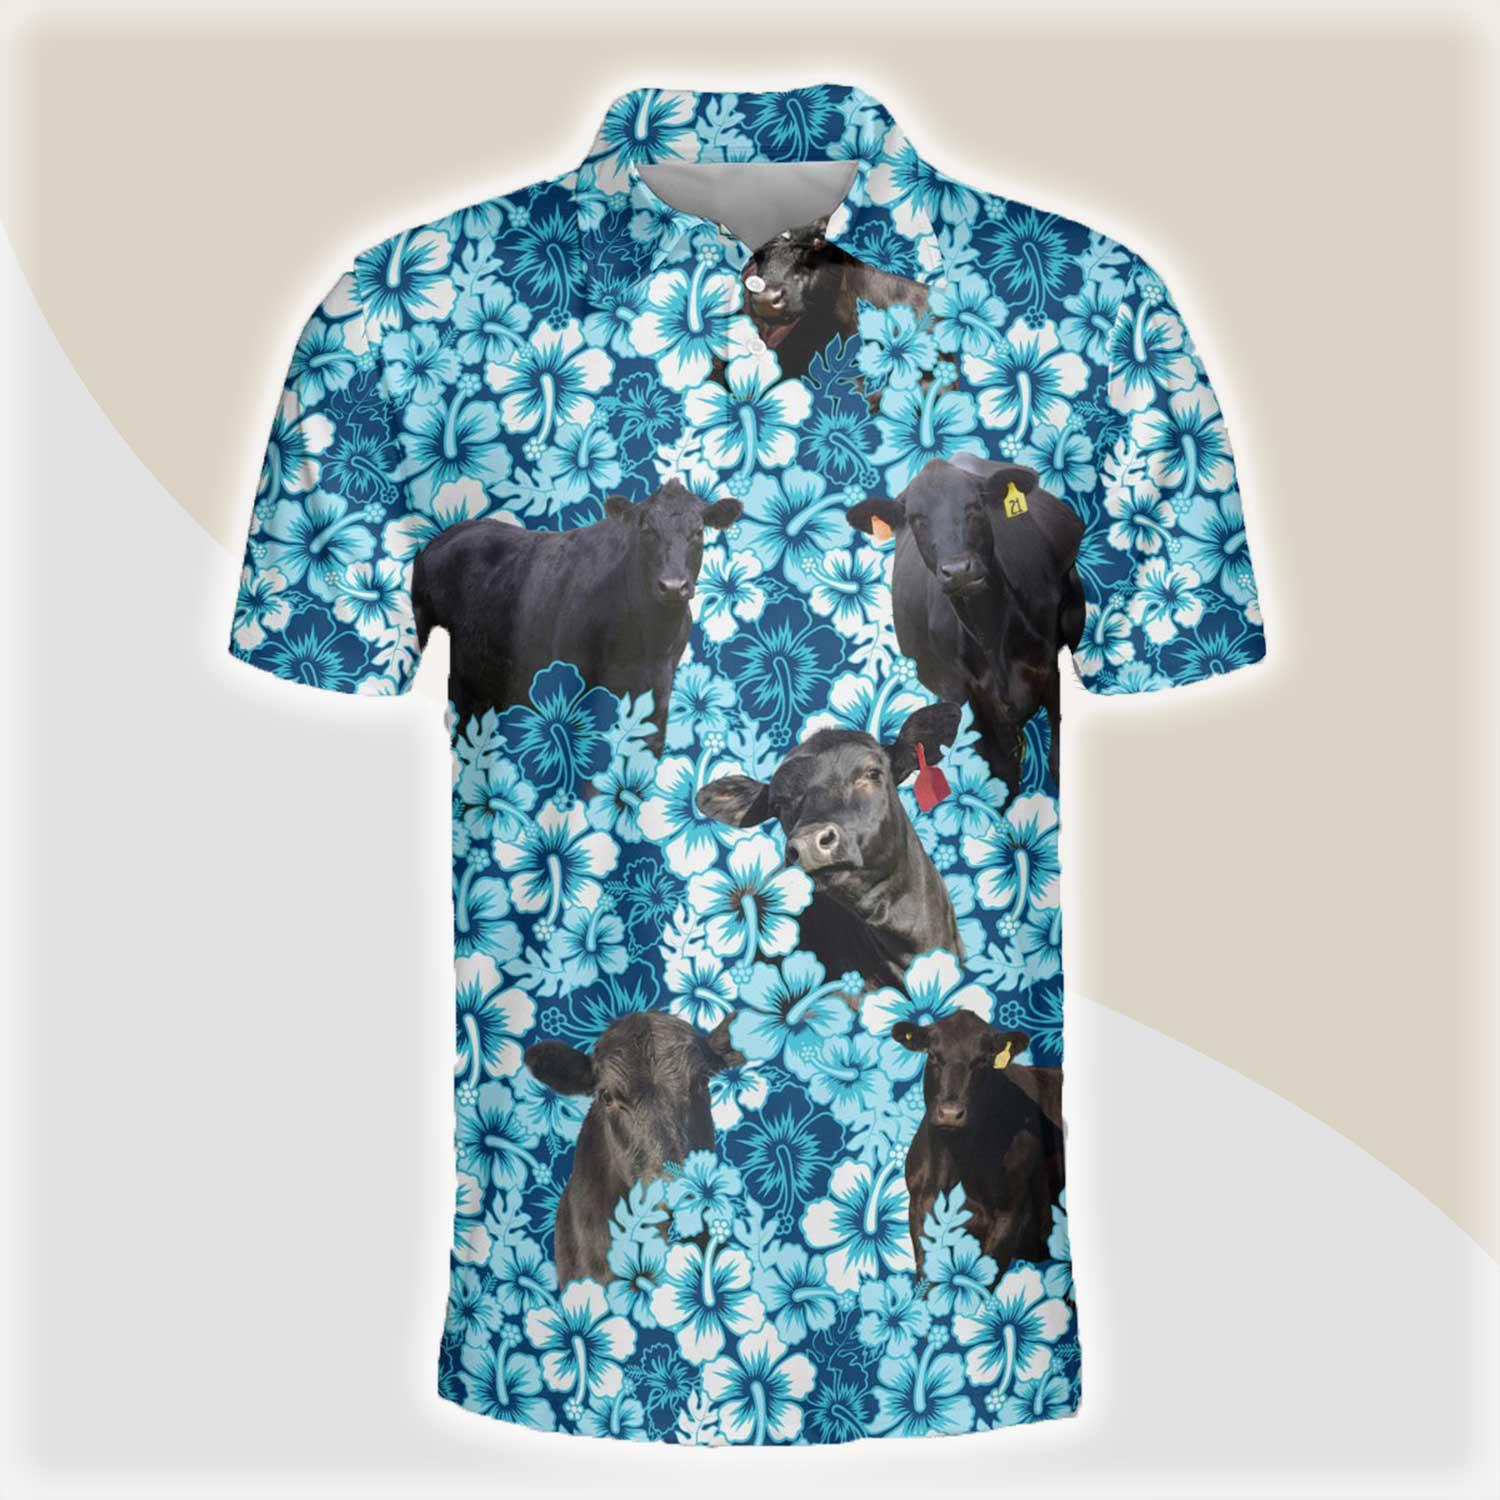 Black Angus Men Polo Shirts - Black Angus Blue Hibiscus Pattern Button Shirts For Men - Perfect Gift For Black Angus Lovers, Cattle Lovers - Amzanimalsgift